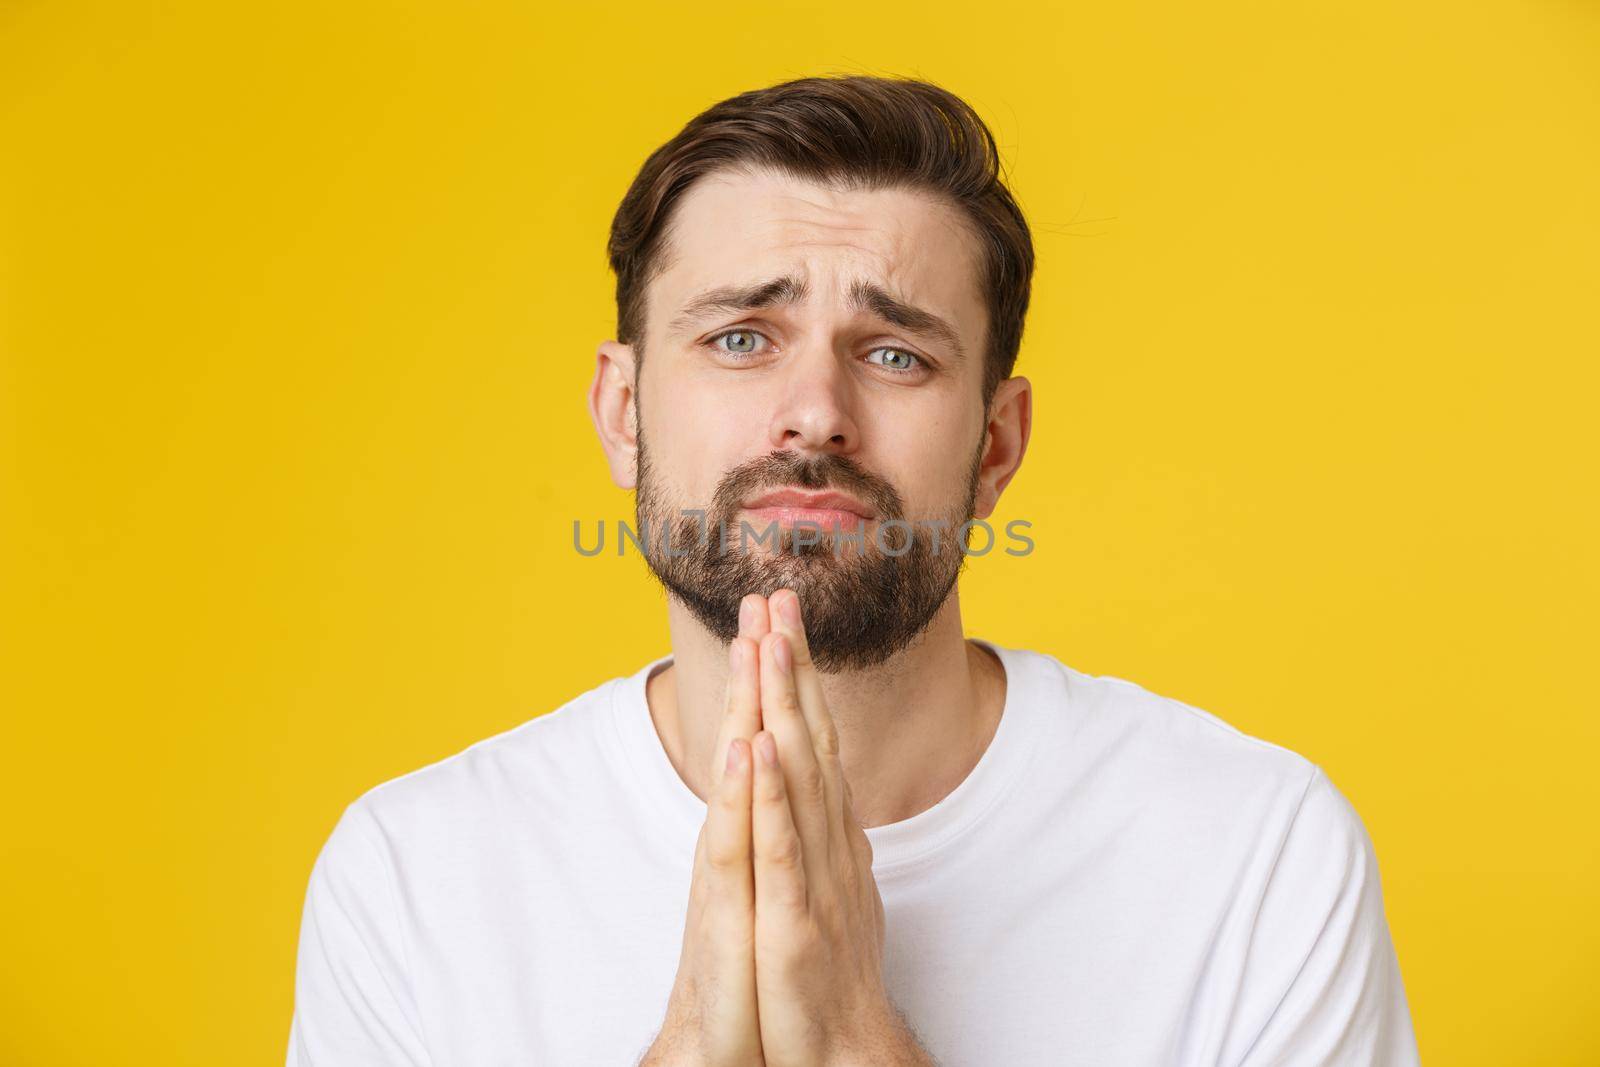 Young guy dressed casually isolated on yellow background, having put hands together in prayer or meditation, looking relaxed and calm